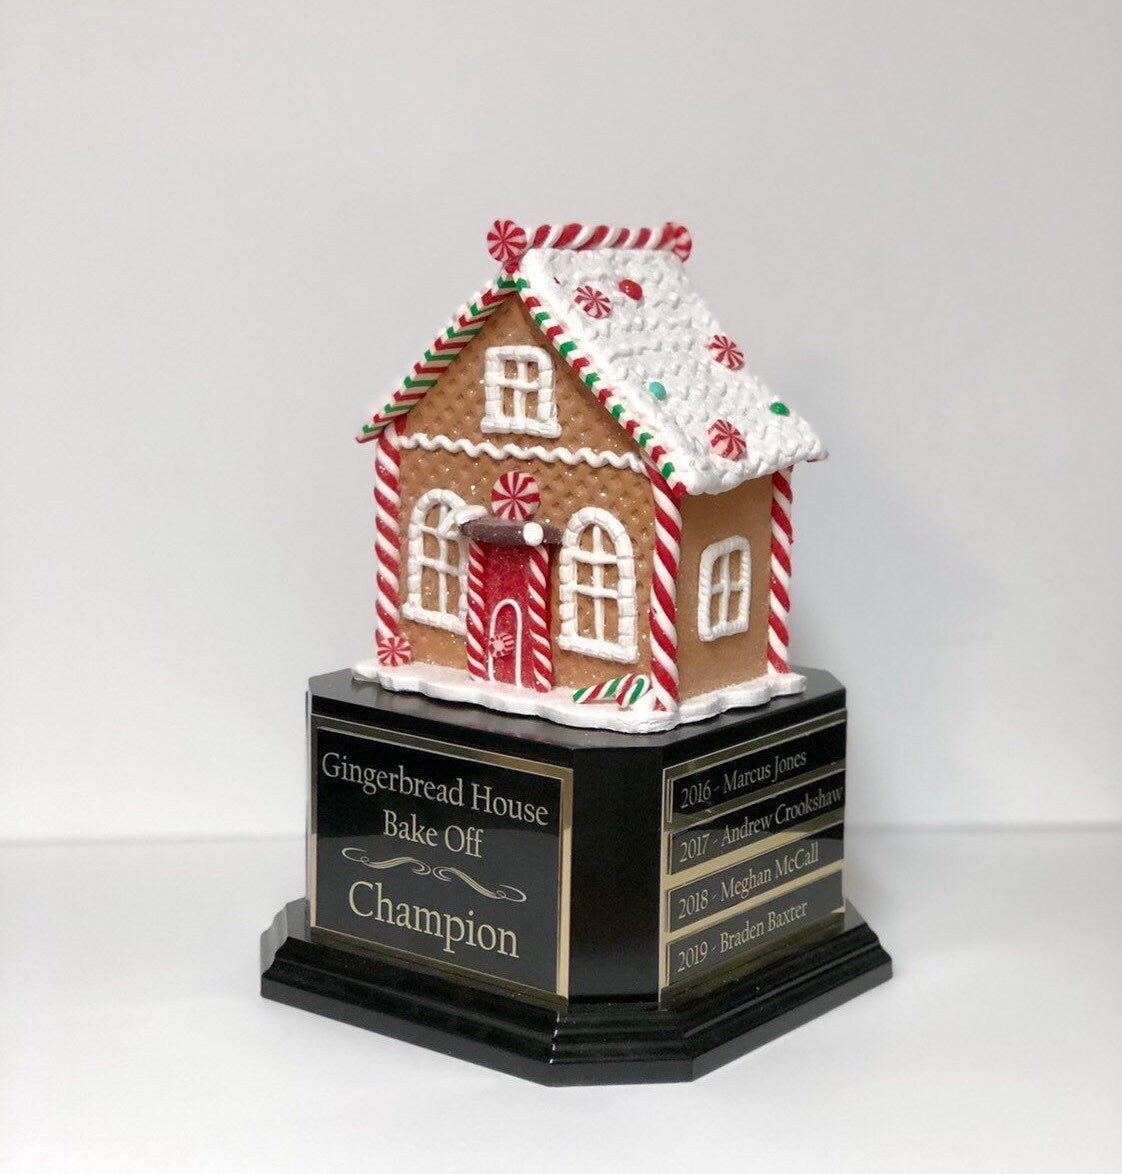 Gingerbread House Trophy Perpetual Christmas Cookie Decorating Bake Off Ugly Sweater Trophy Contest Winner Christmas Holiday Party Decor